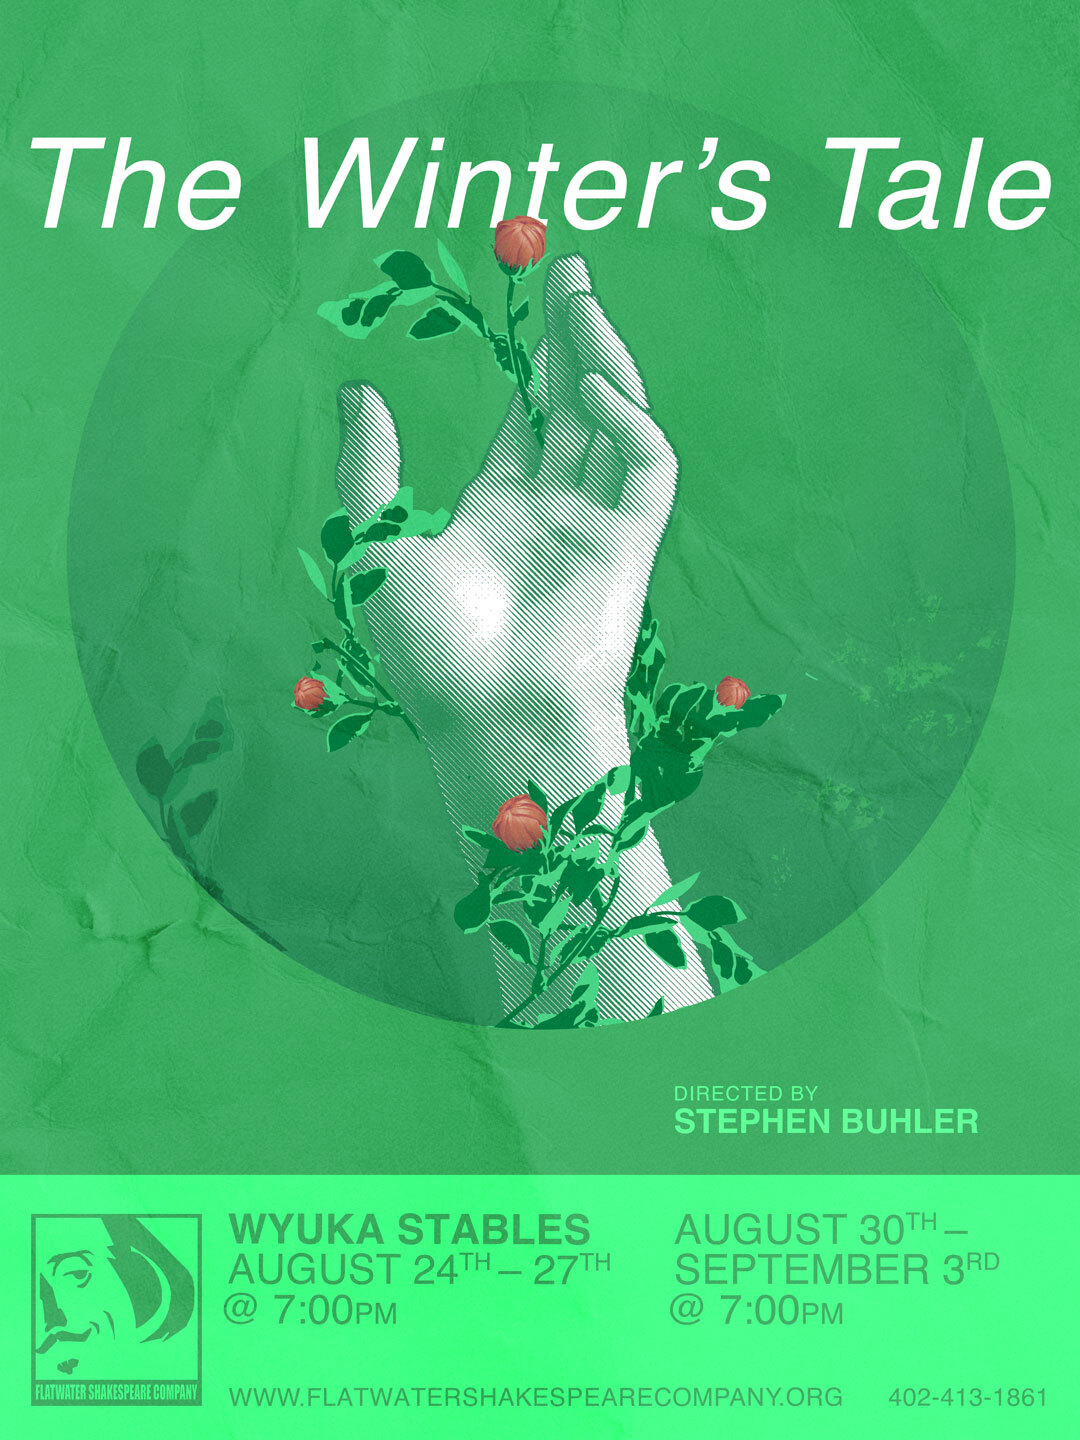 9/3 KID - KIDS (10 and Under): Sun. September 3, 2023 | 7:00 p.m. - 10:00 p.m. CST | Wyuka Stables (The Winter's Tale)